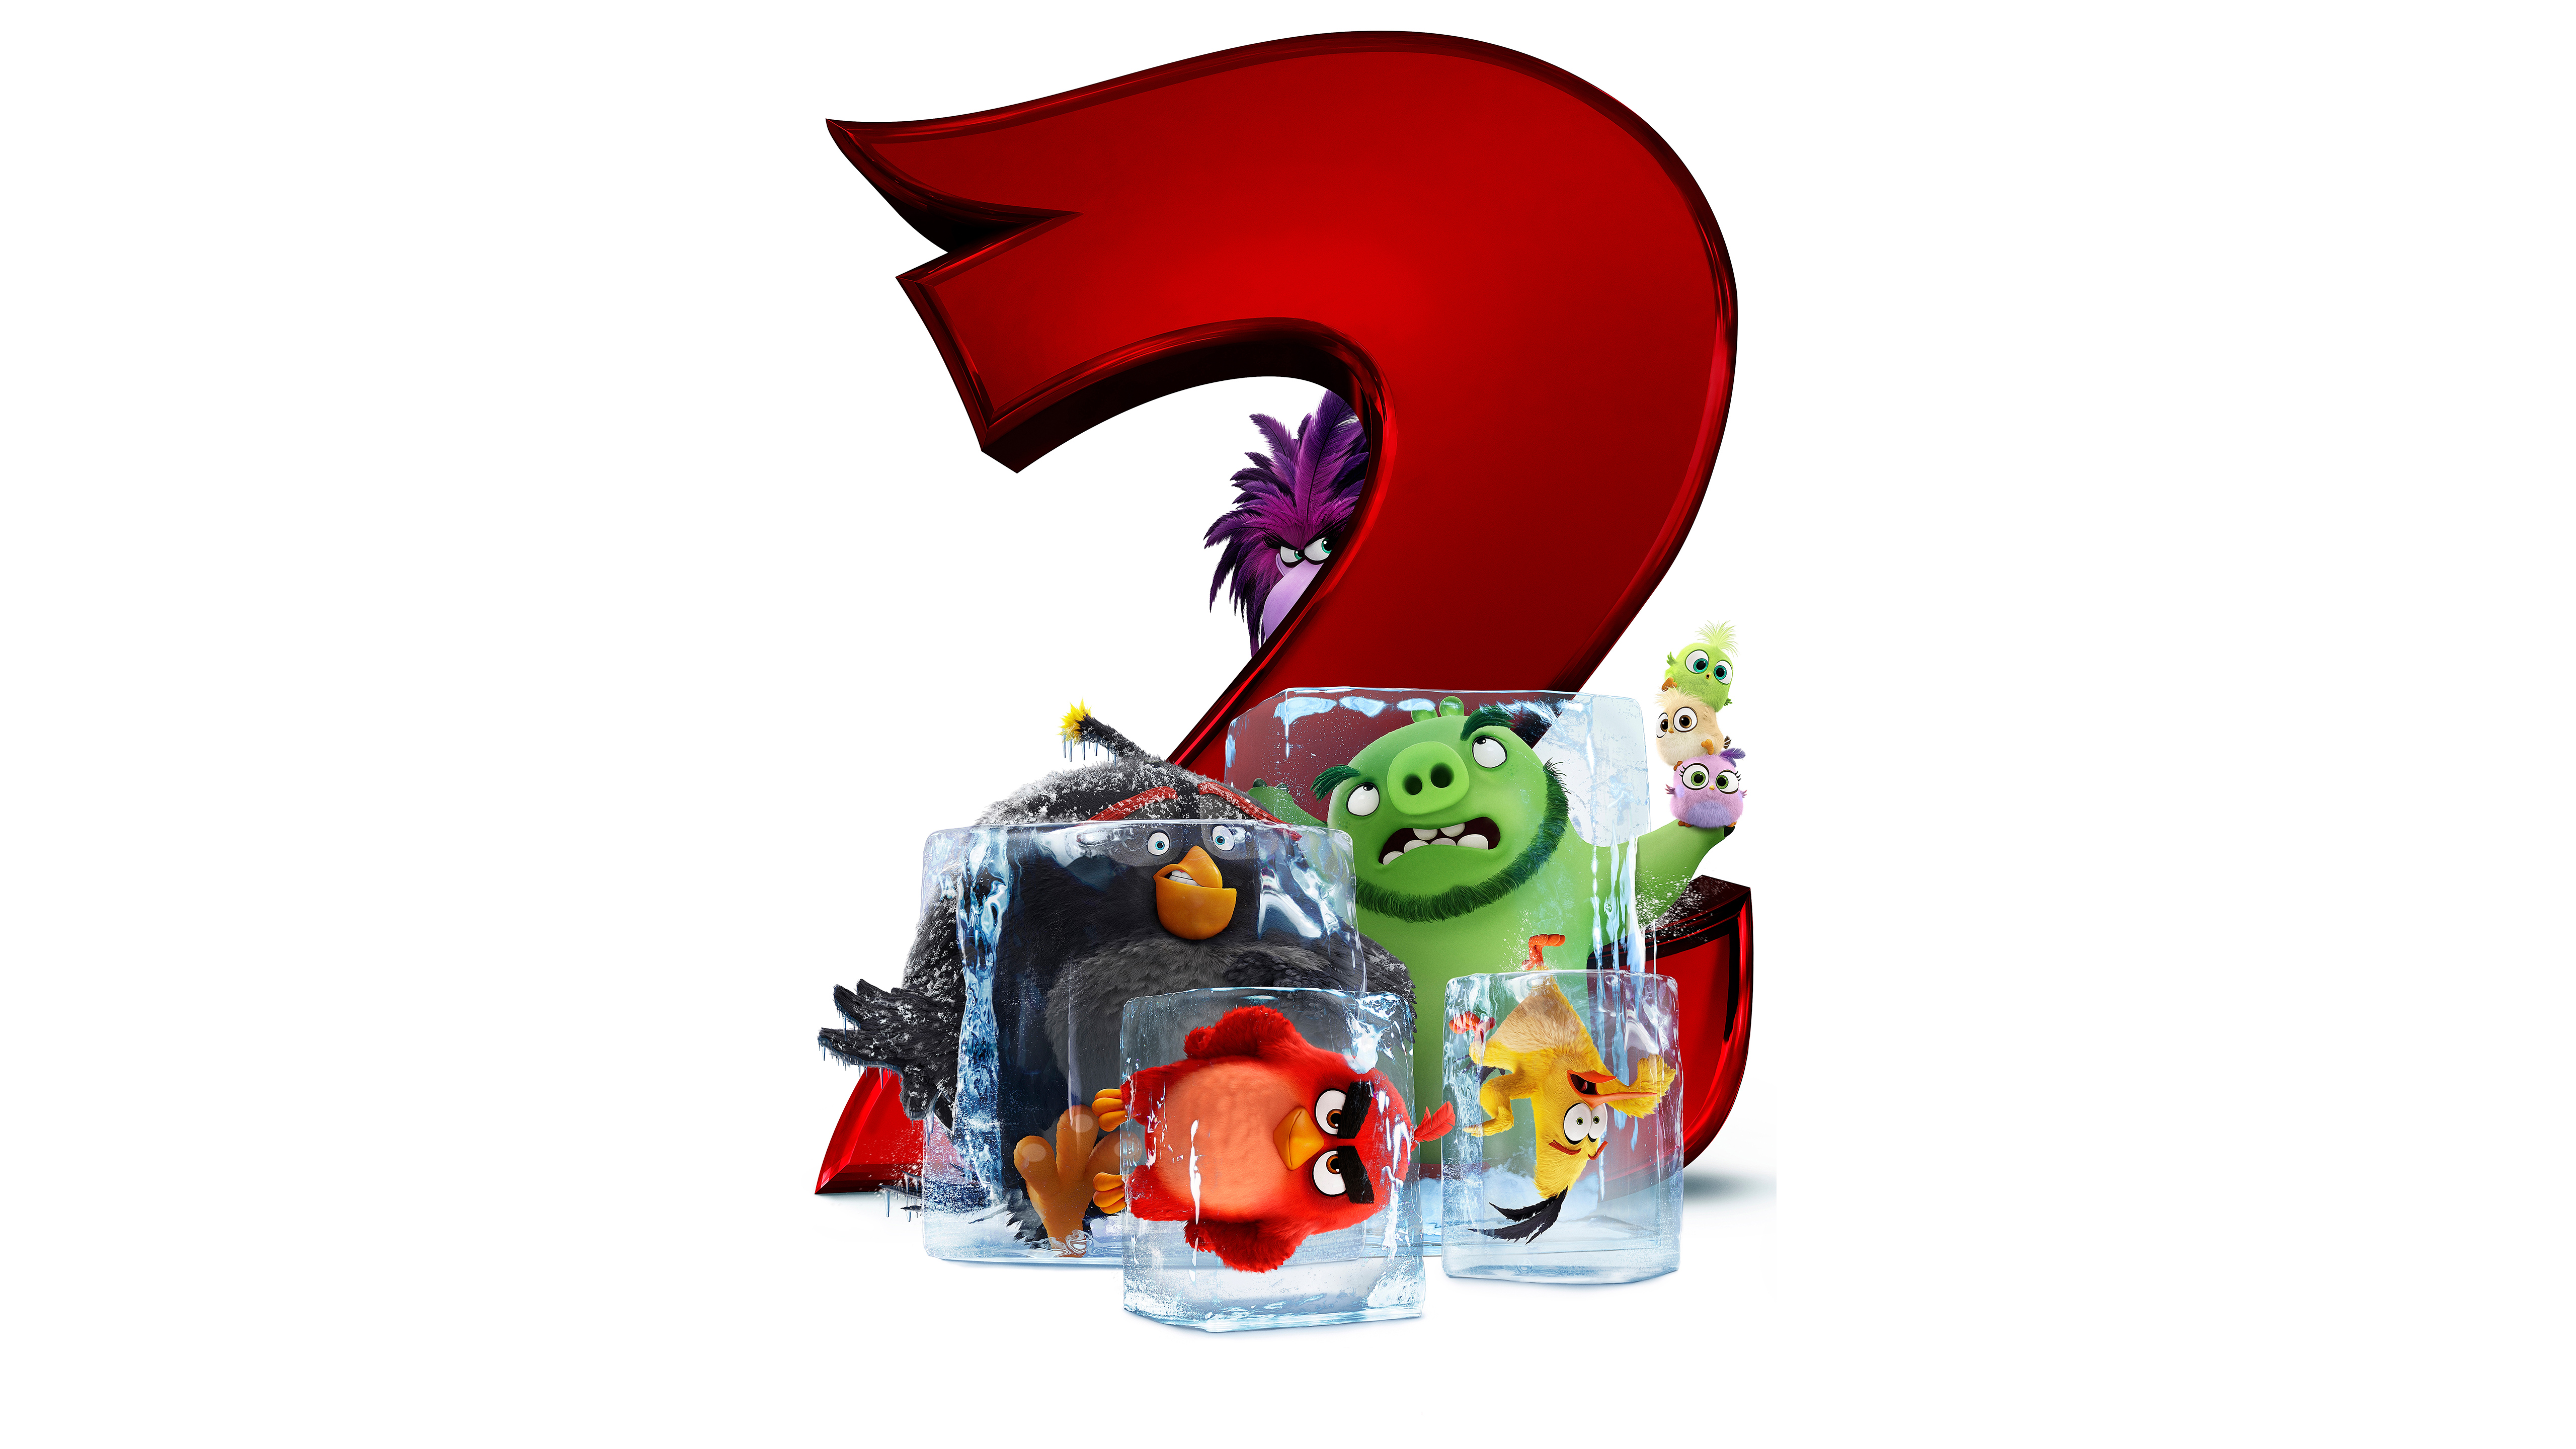 Wallpapers The Angry Birds 2 the angry birds movie 2 movies on the desktop